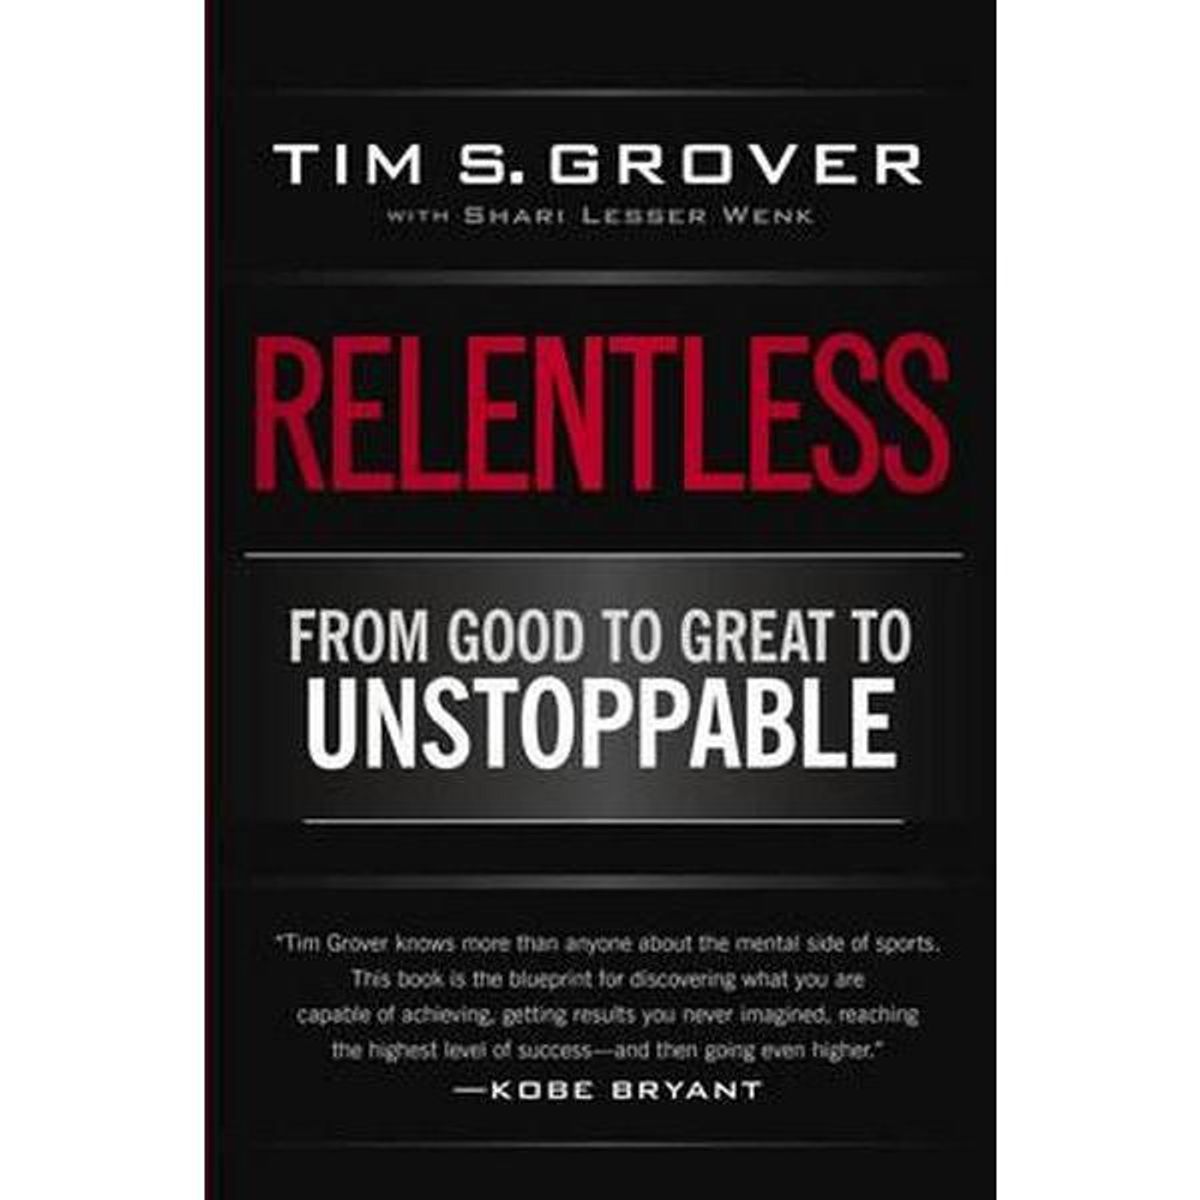 Book Review: Relentless, From Good to Great to Unstoppable